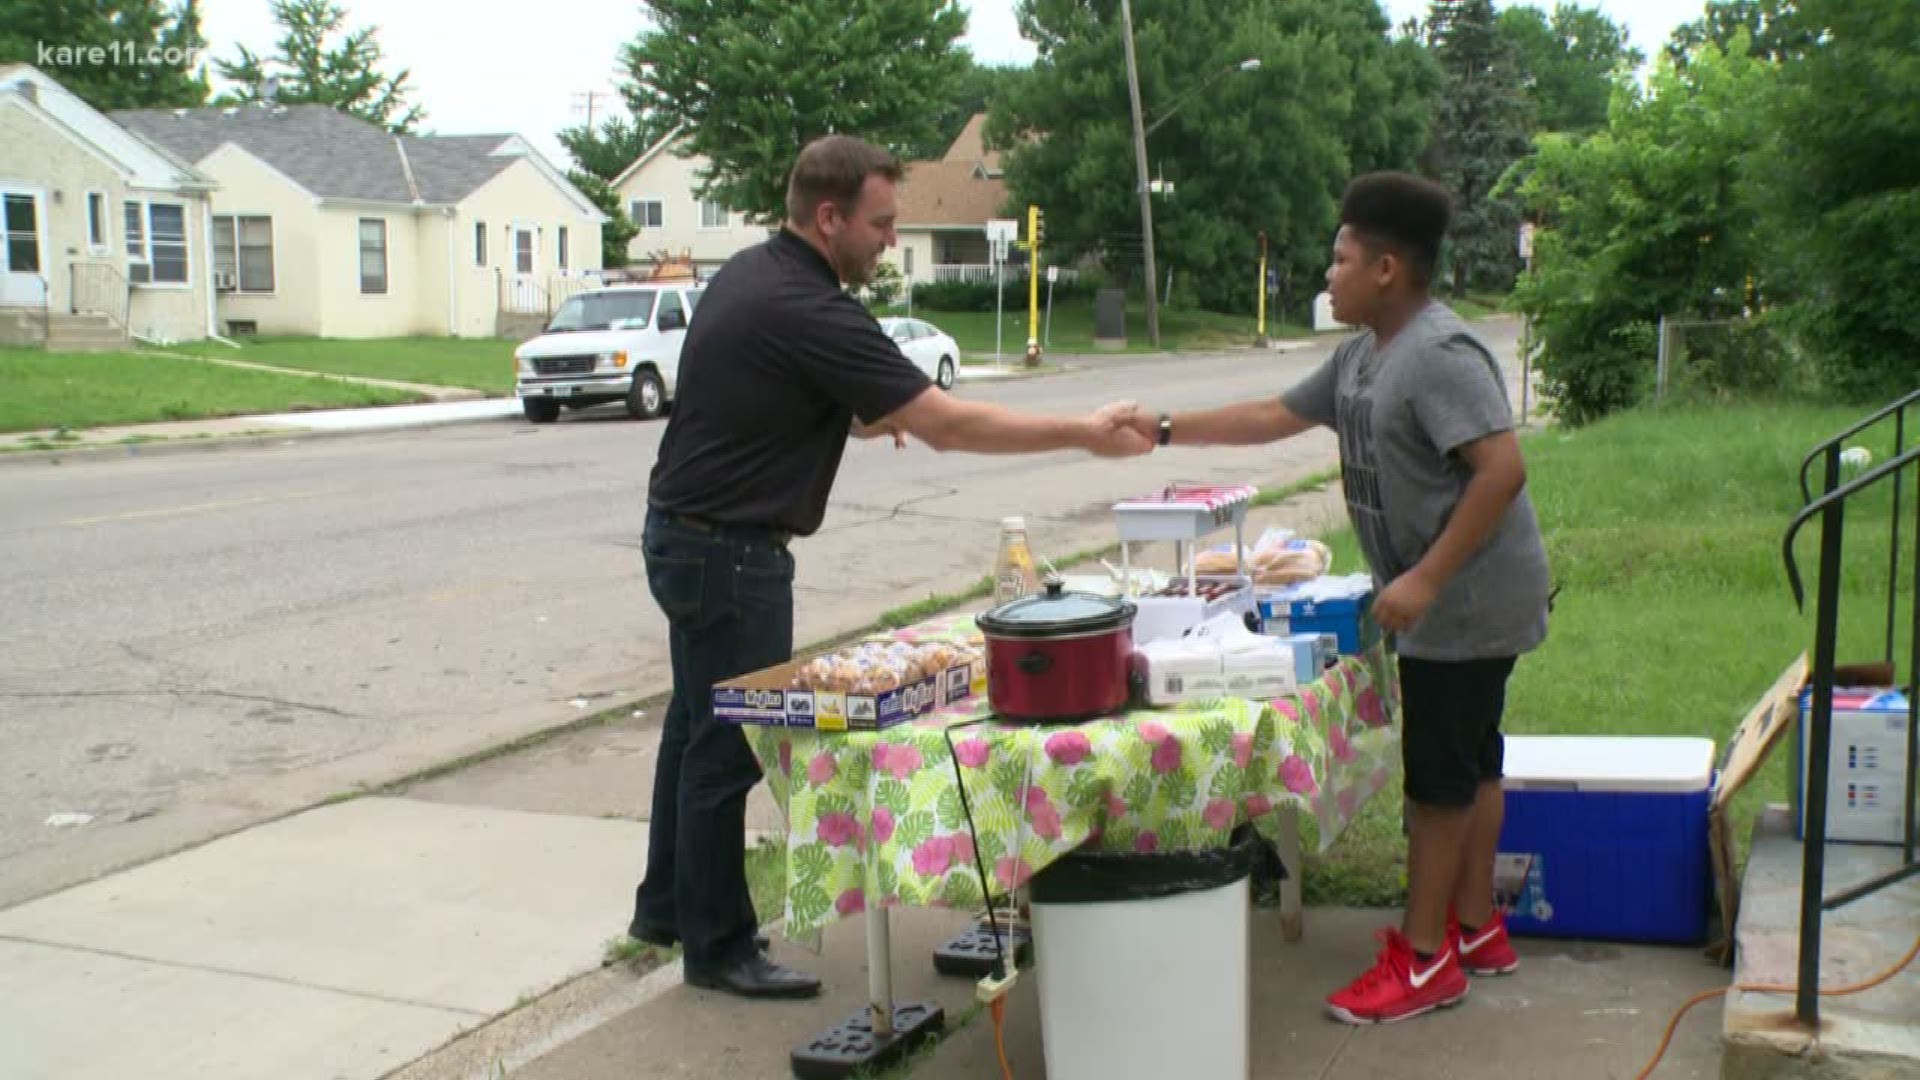 Business is booming at 13-year-old's hot dog stand in Minneapolis